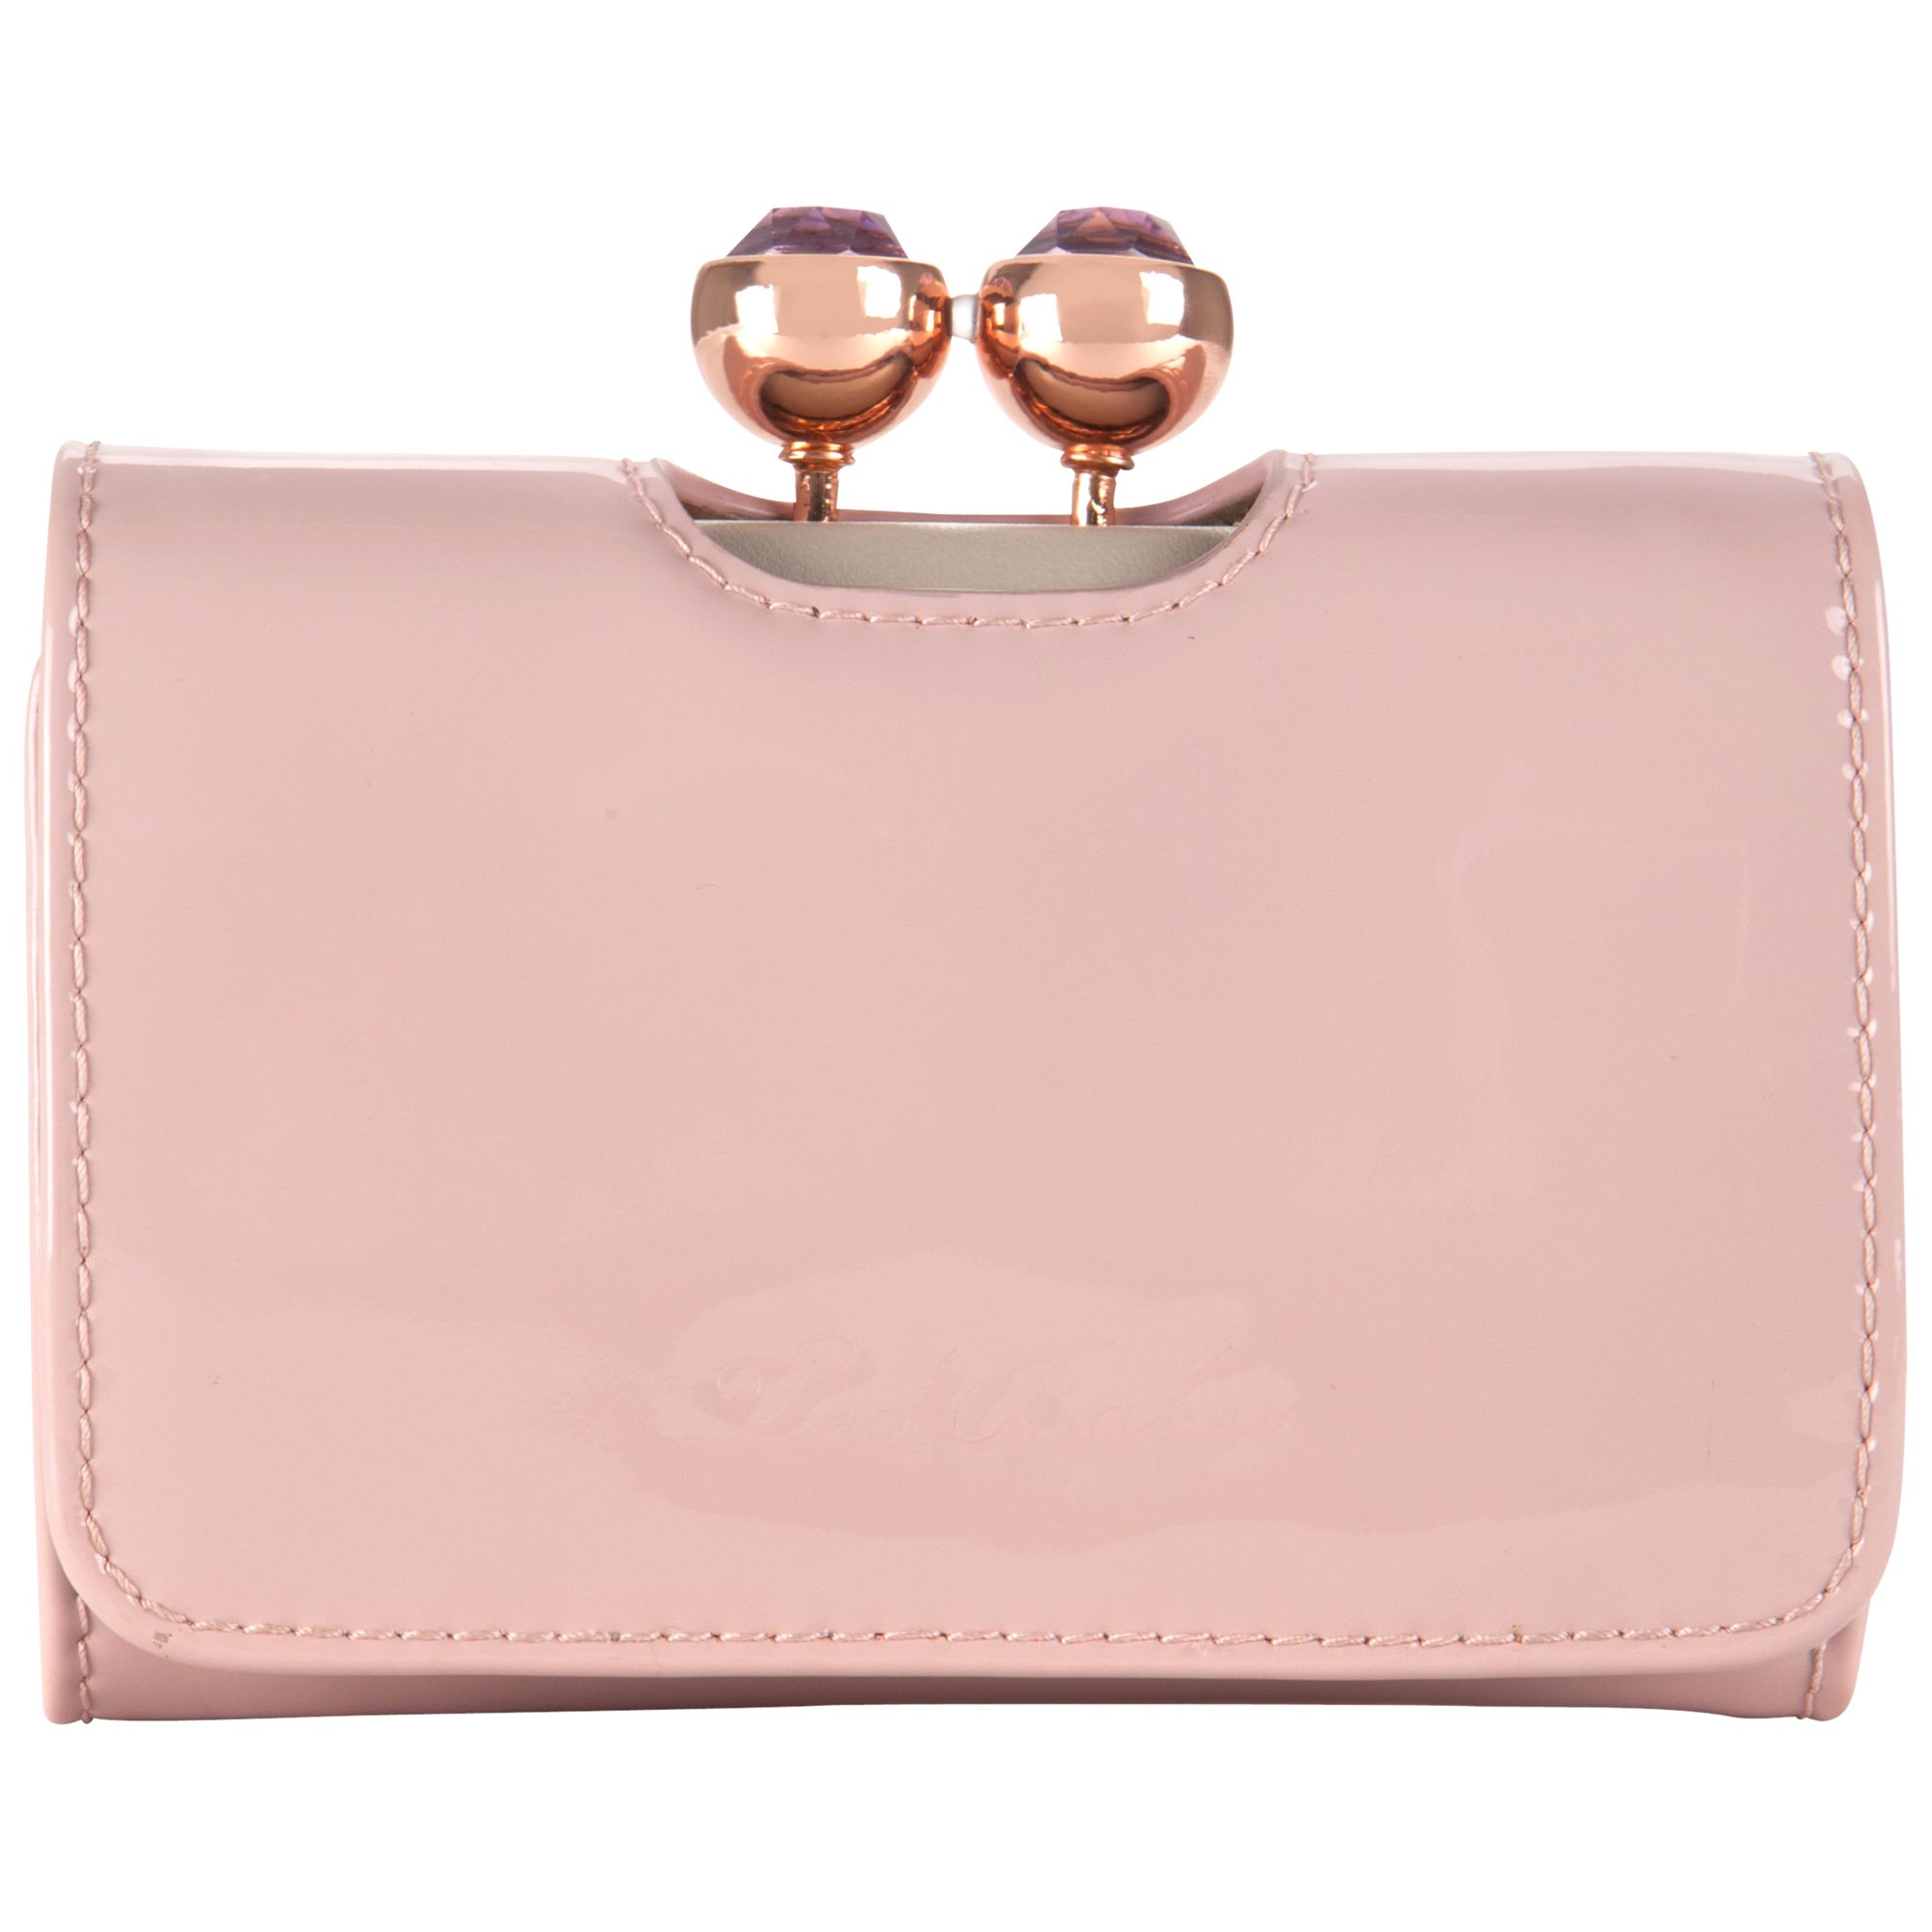 Shyla is a signature style purse from Ted Baker